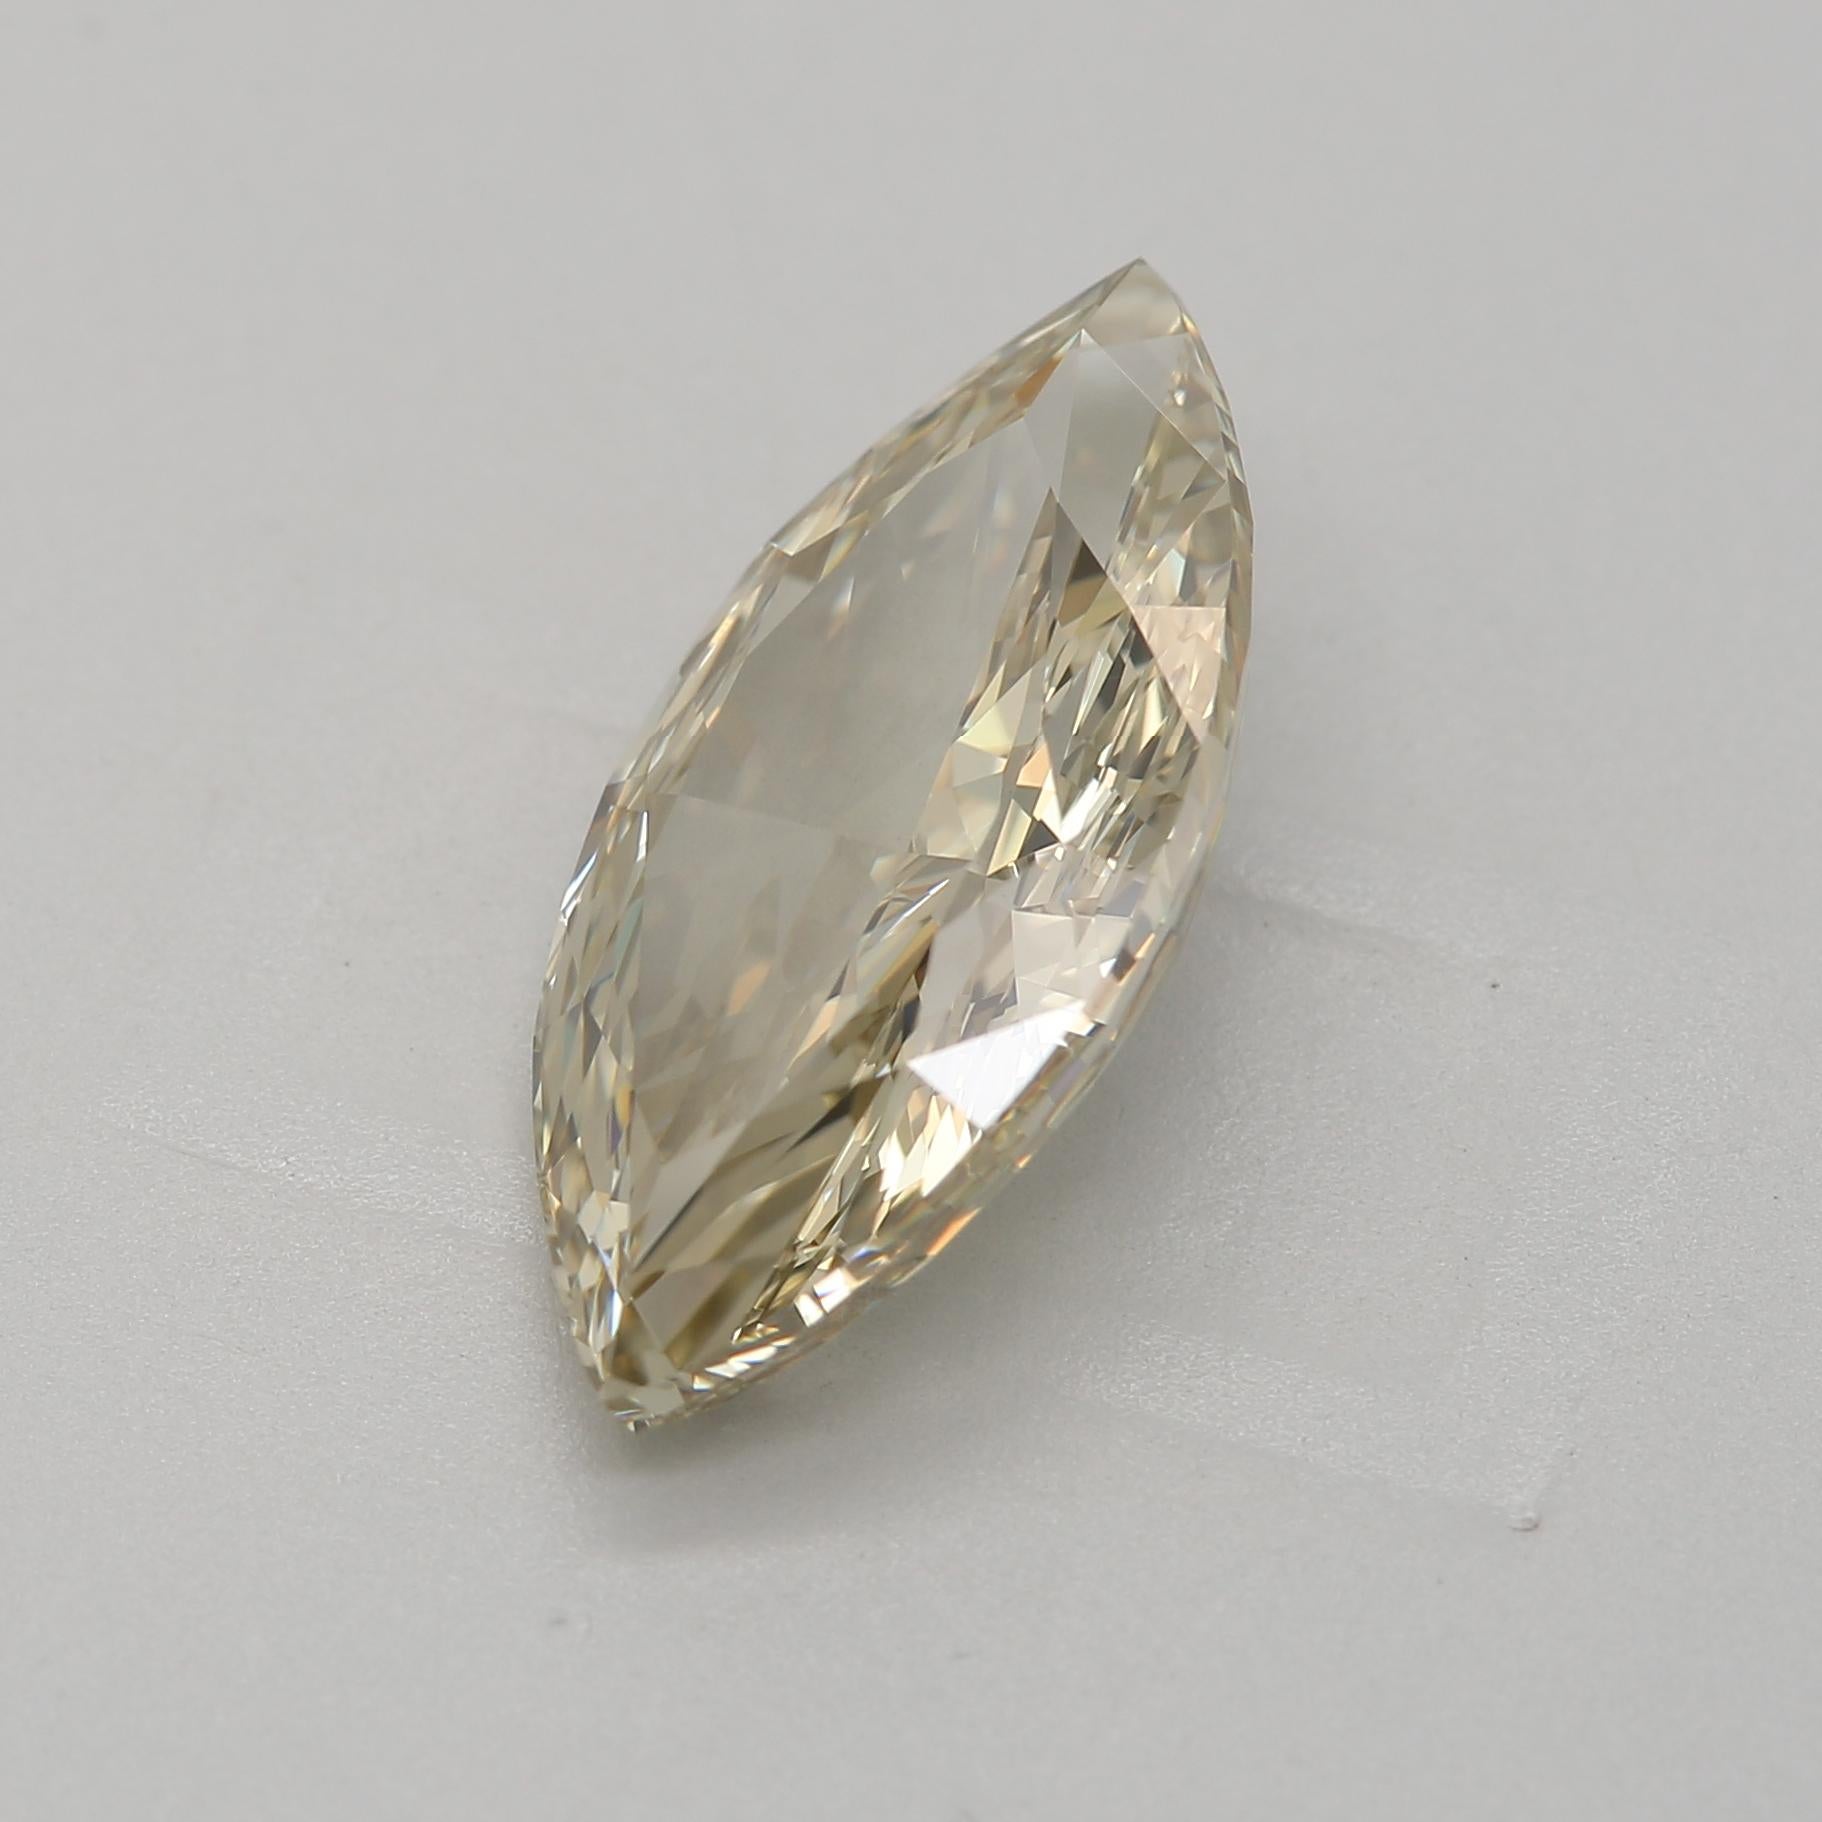 ***100% NATURAL FANCY COLOUR DIAMOND***

✪ Diamond Details ✪

➛ Shape: Marquise
➛ Colour Grade: Fancy Brownish Greenish Yellow
➛ Carat: 2.71
➛ Clarity: VVS2
➛ GIA Certified 

^FEATURES OF THE DIAMOND^

Our 2.71 carat diamond is a sizable gemstone,